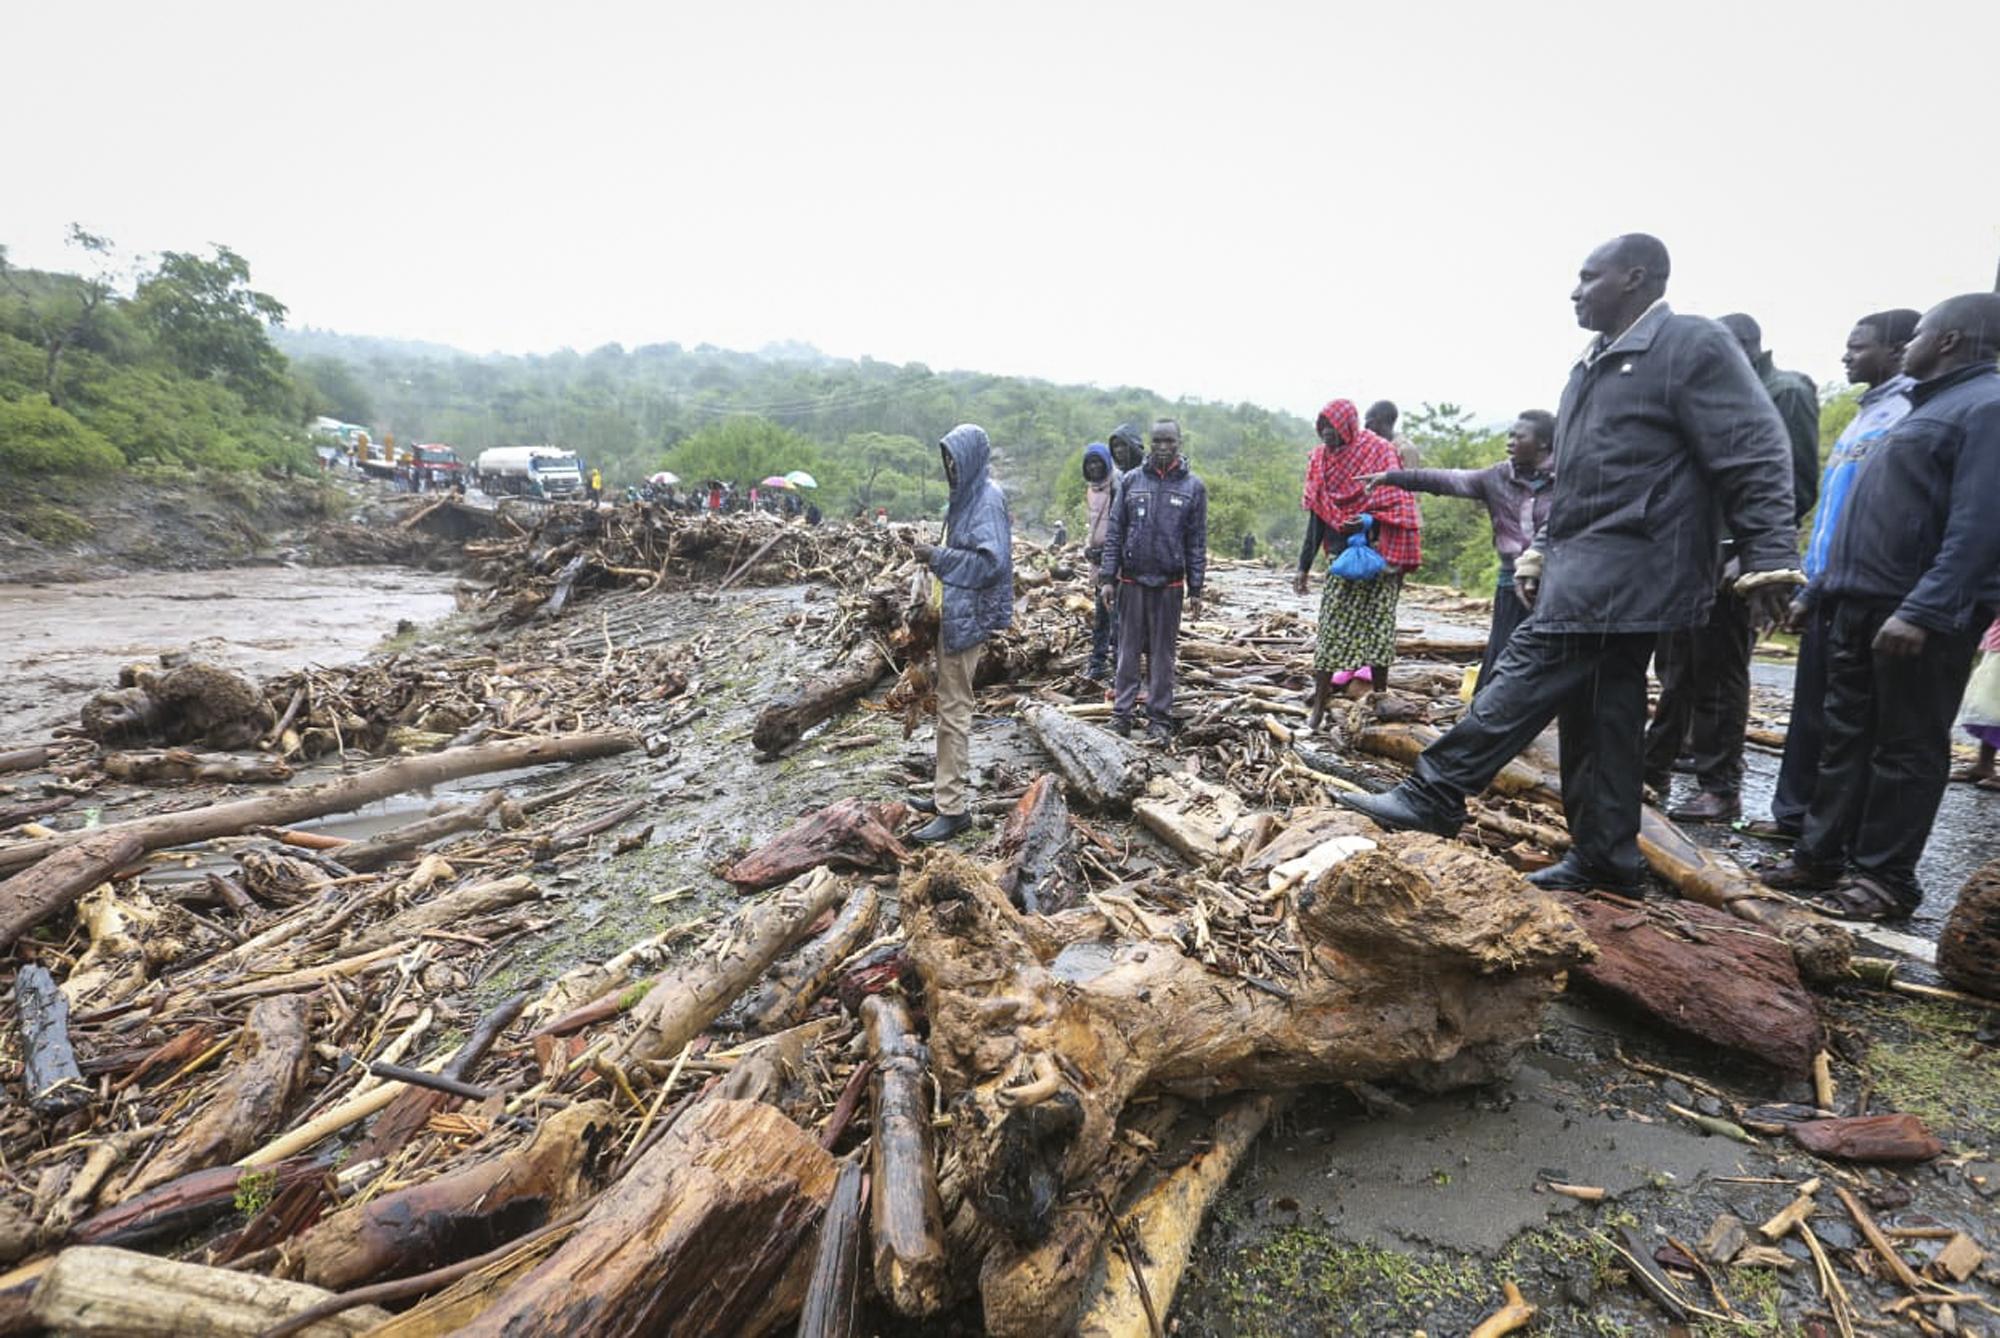 Passengers from stranded vehicles stand next to the debris from floodwaters, on the road from Kapenguria, in West Pokot county.